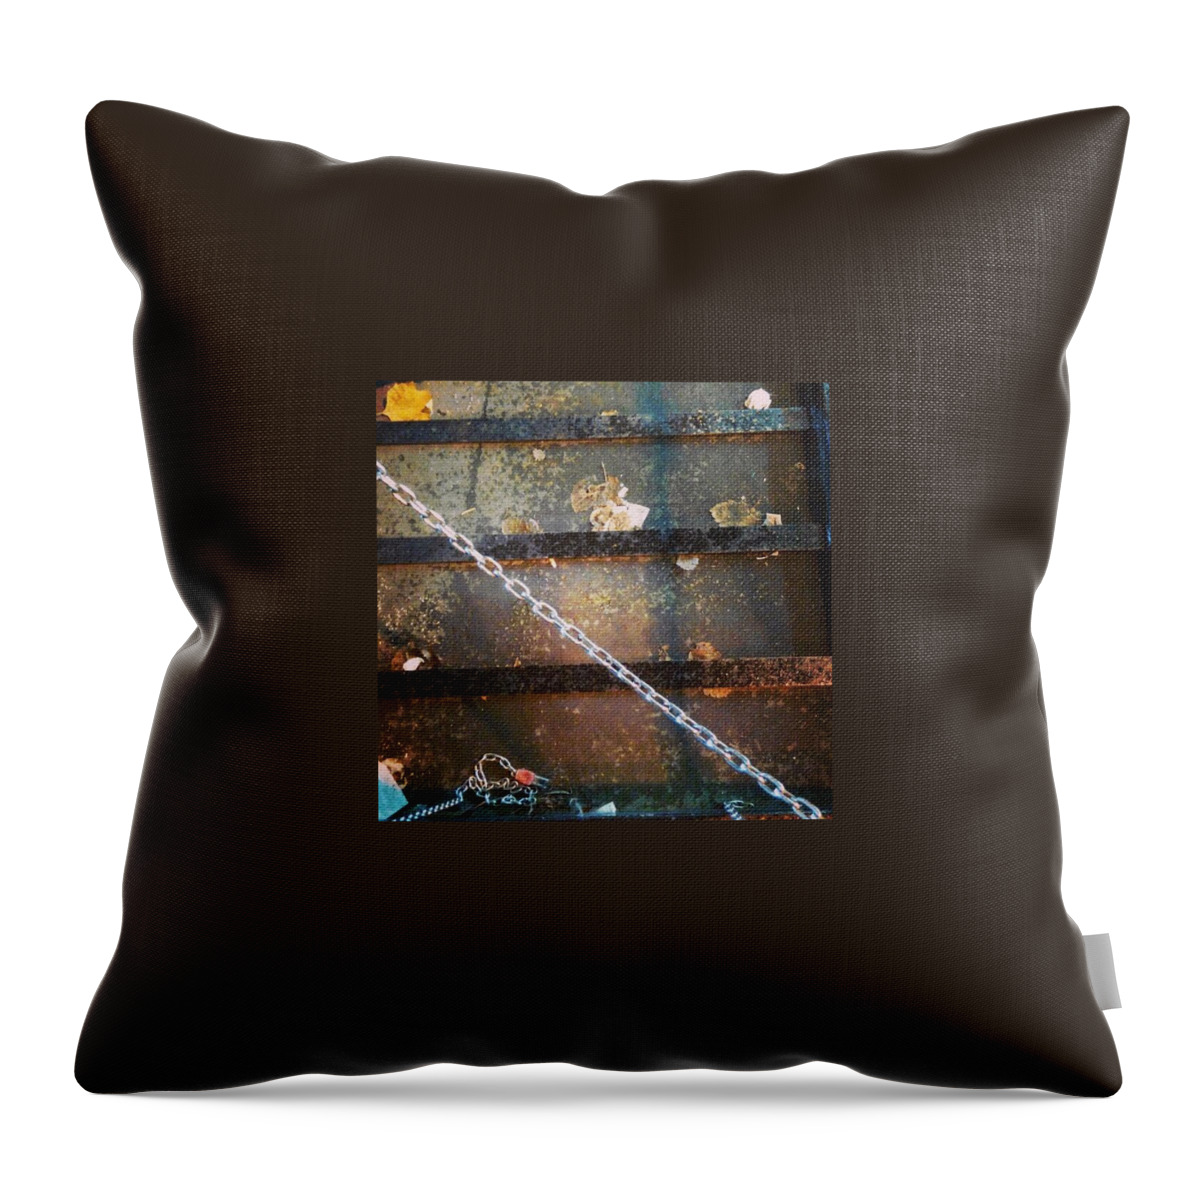  Throw Pillow featuring the photograph Instagram Photo #801383605271 by Abbie Shores